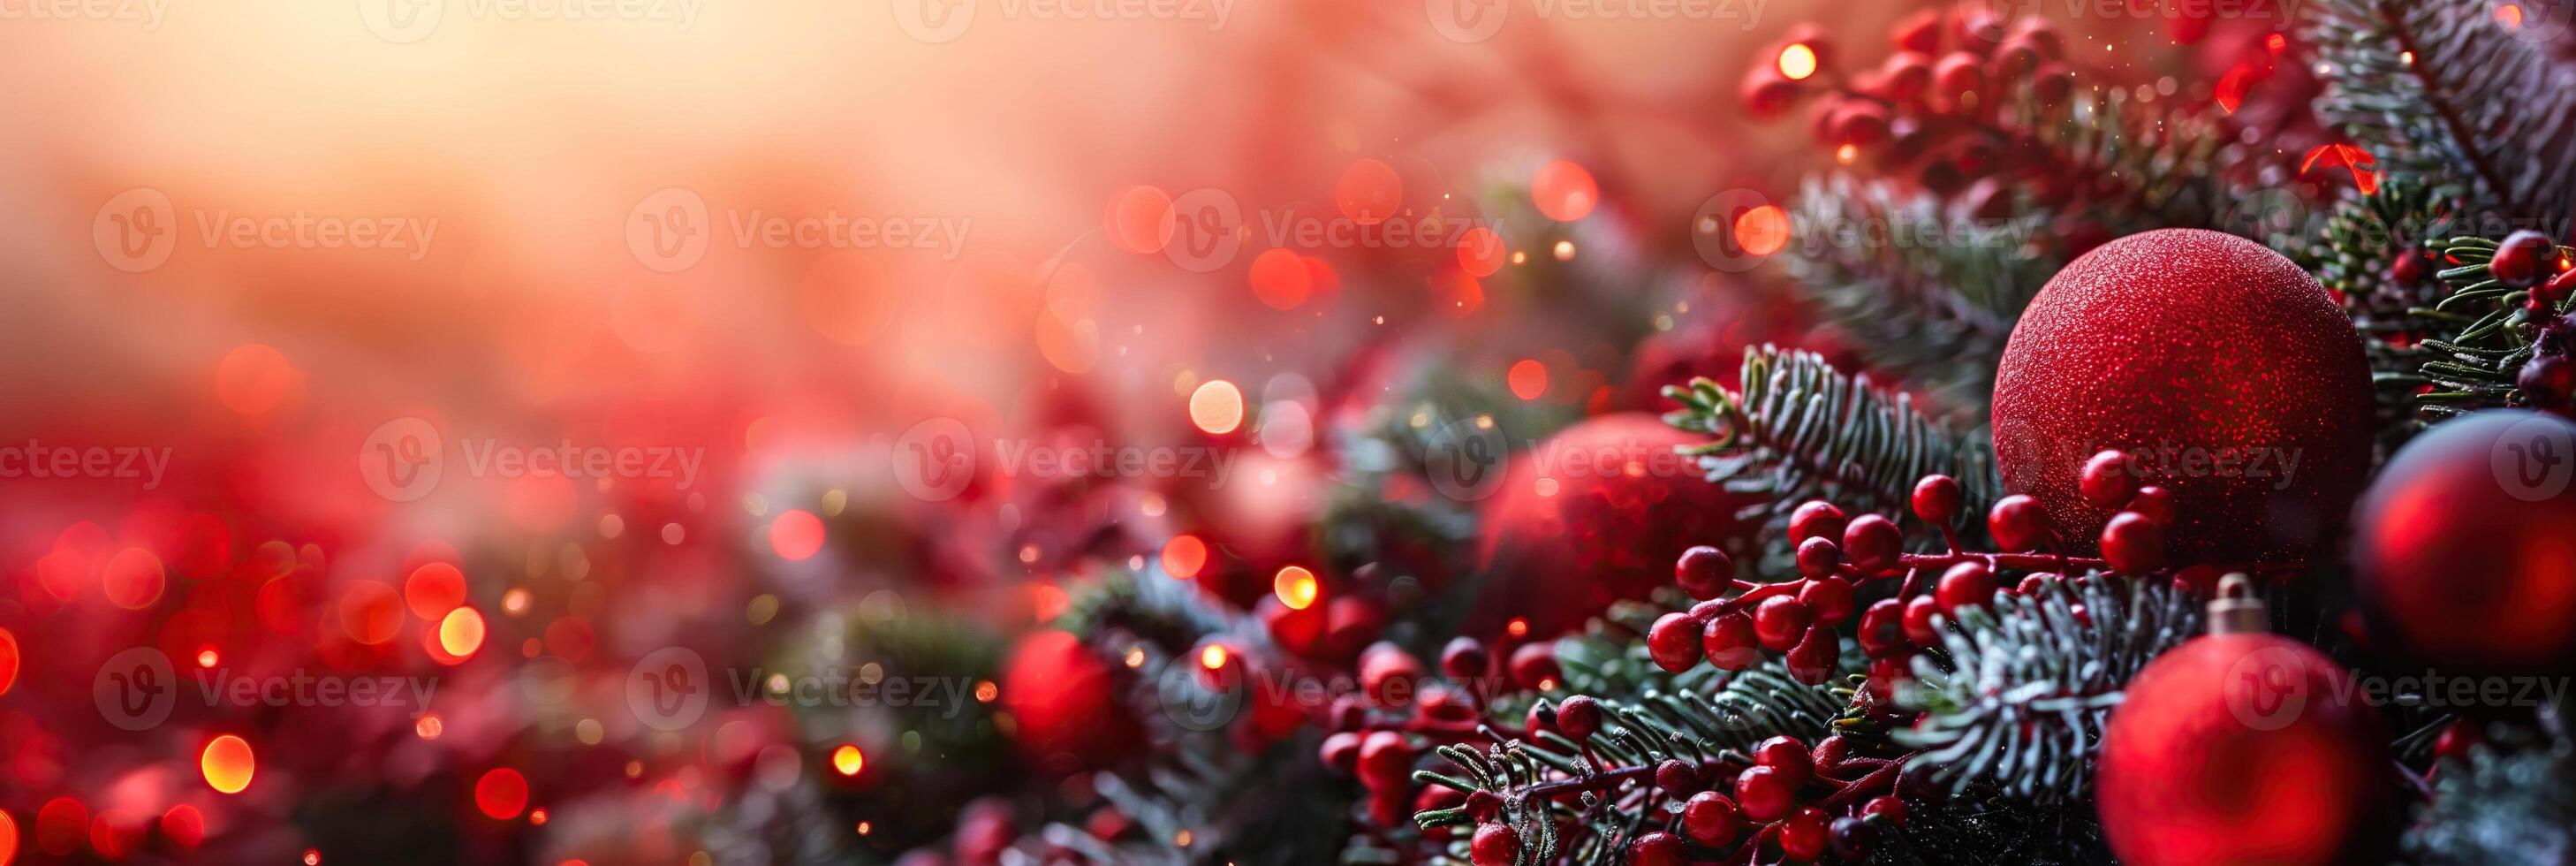 A red and green Christmas tree with red and green berries and red photo